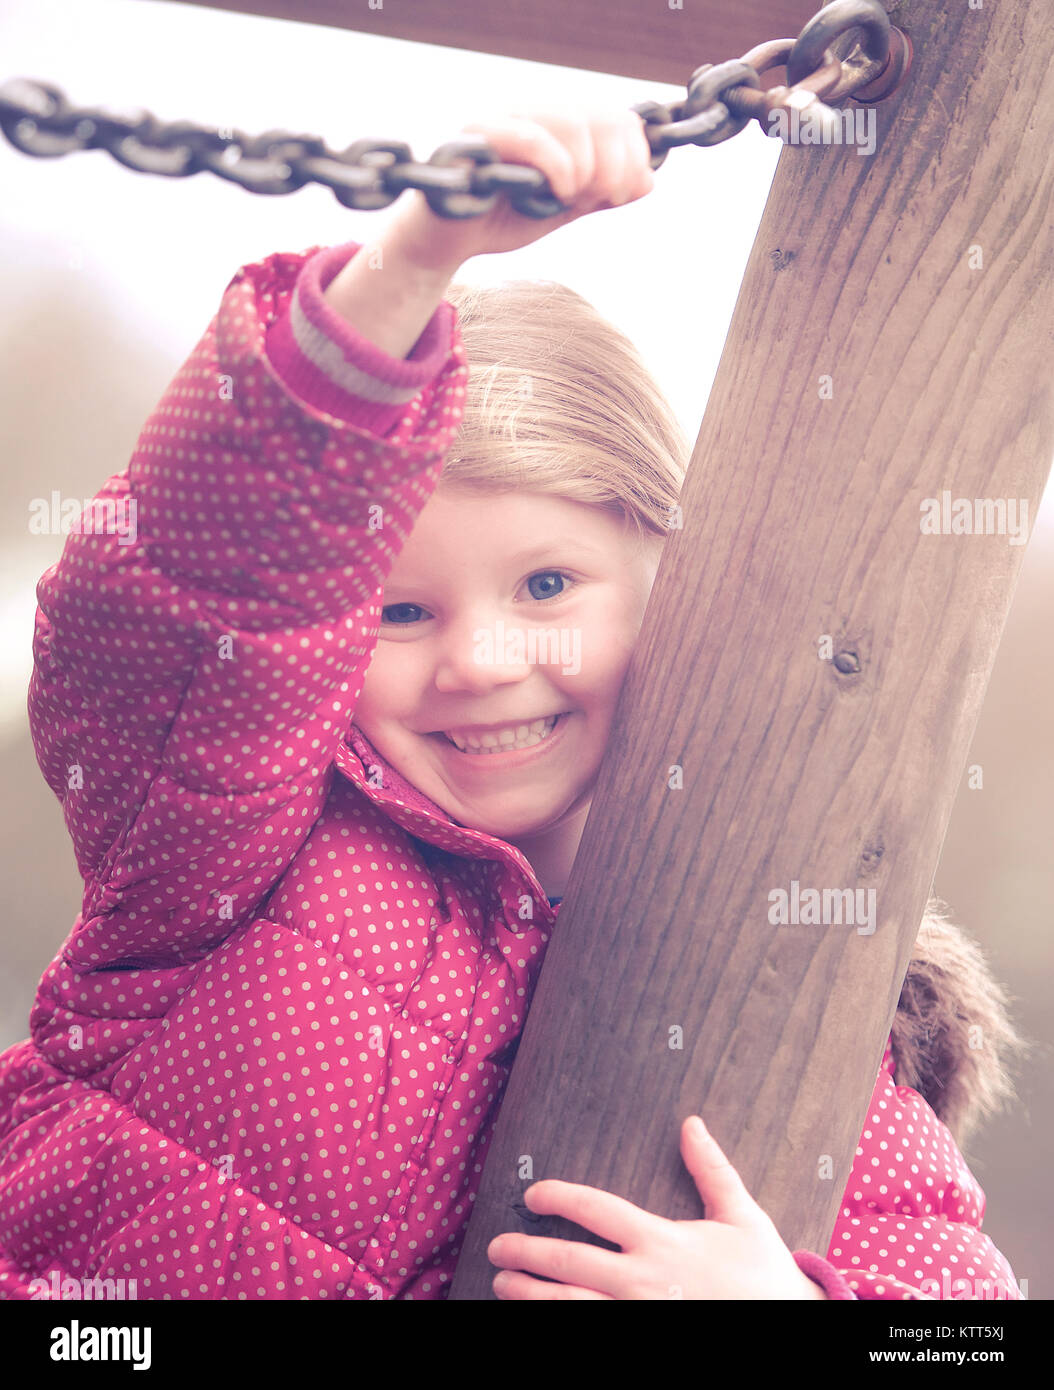 Girl playing in a playground Stock Photo